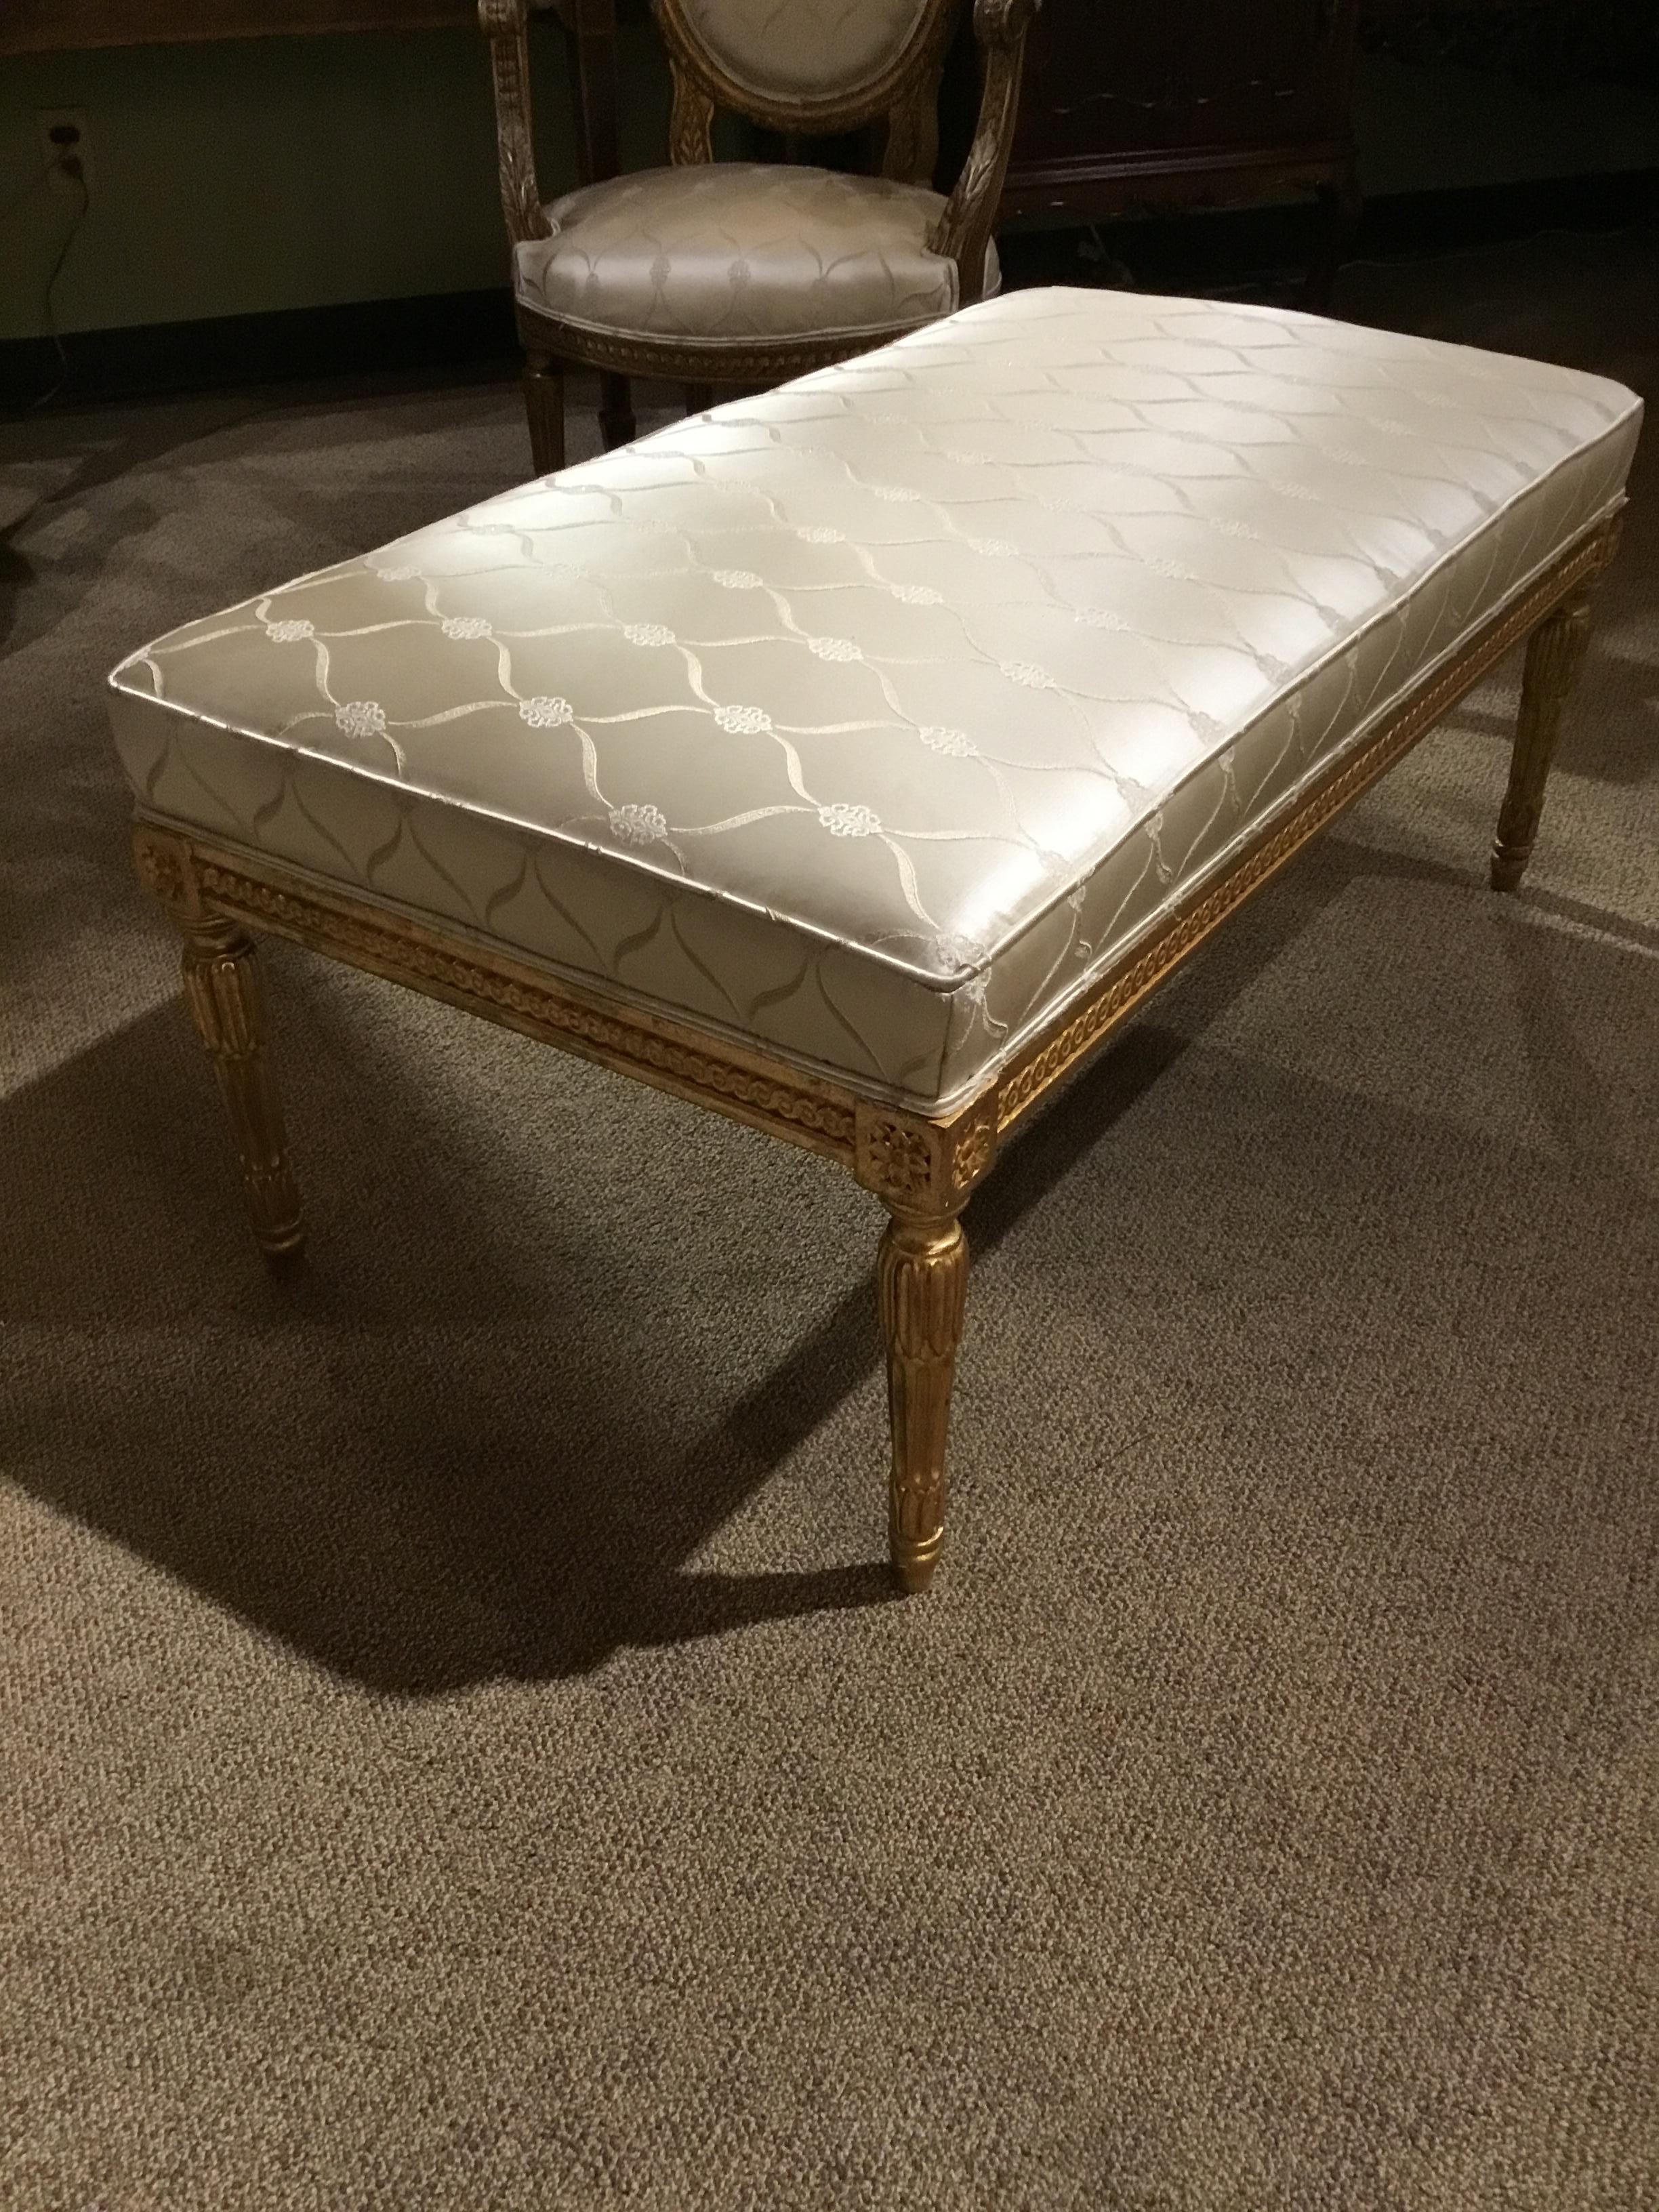 Beautiful reeded legs and banding in giltwood adorn the structure of
This bench.